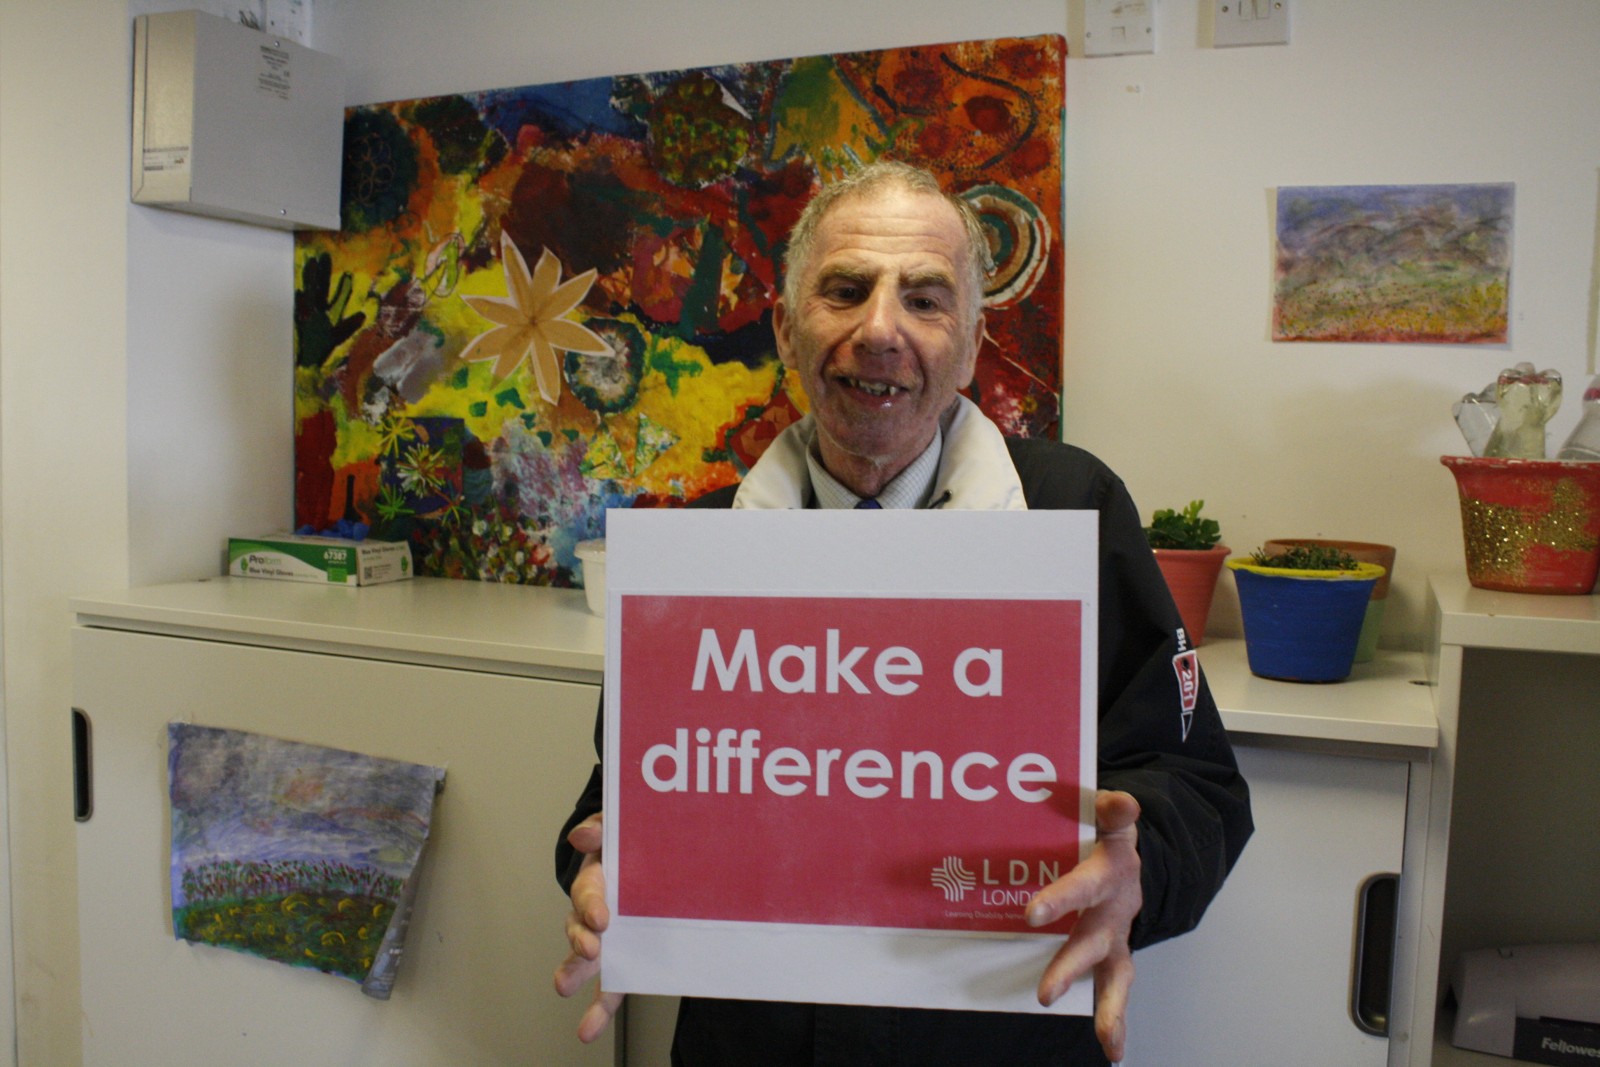 Malcolm at LDN Community Hub holding a sign saying Make a Difference